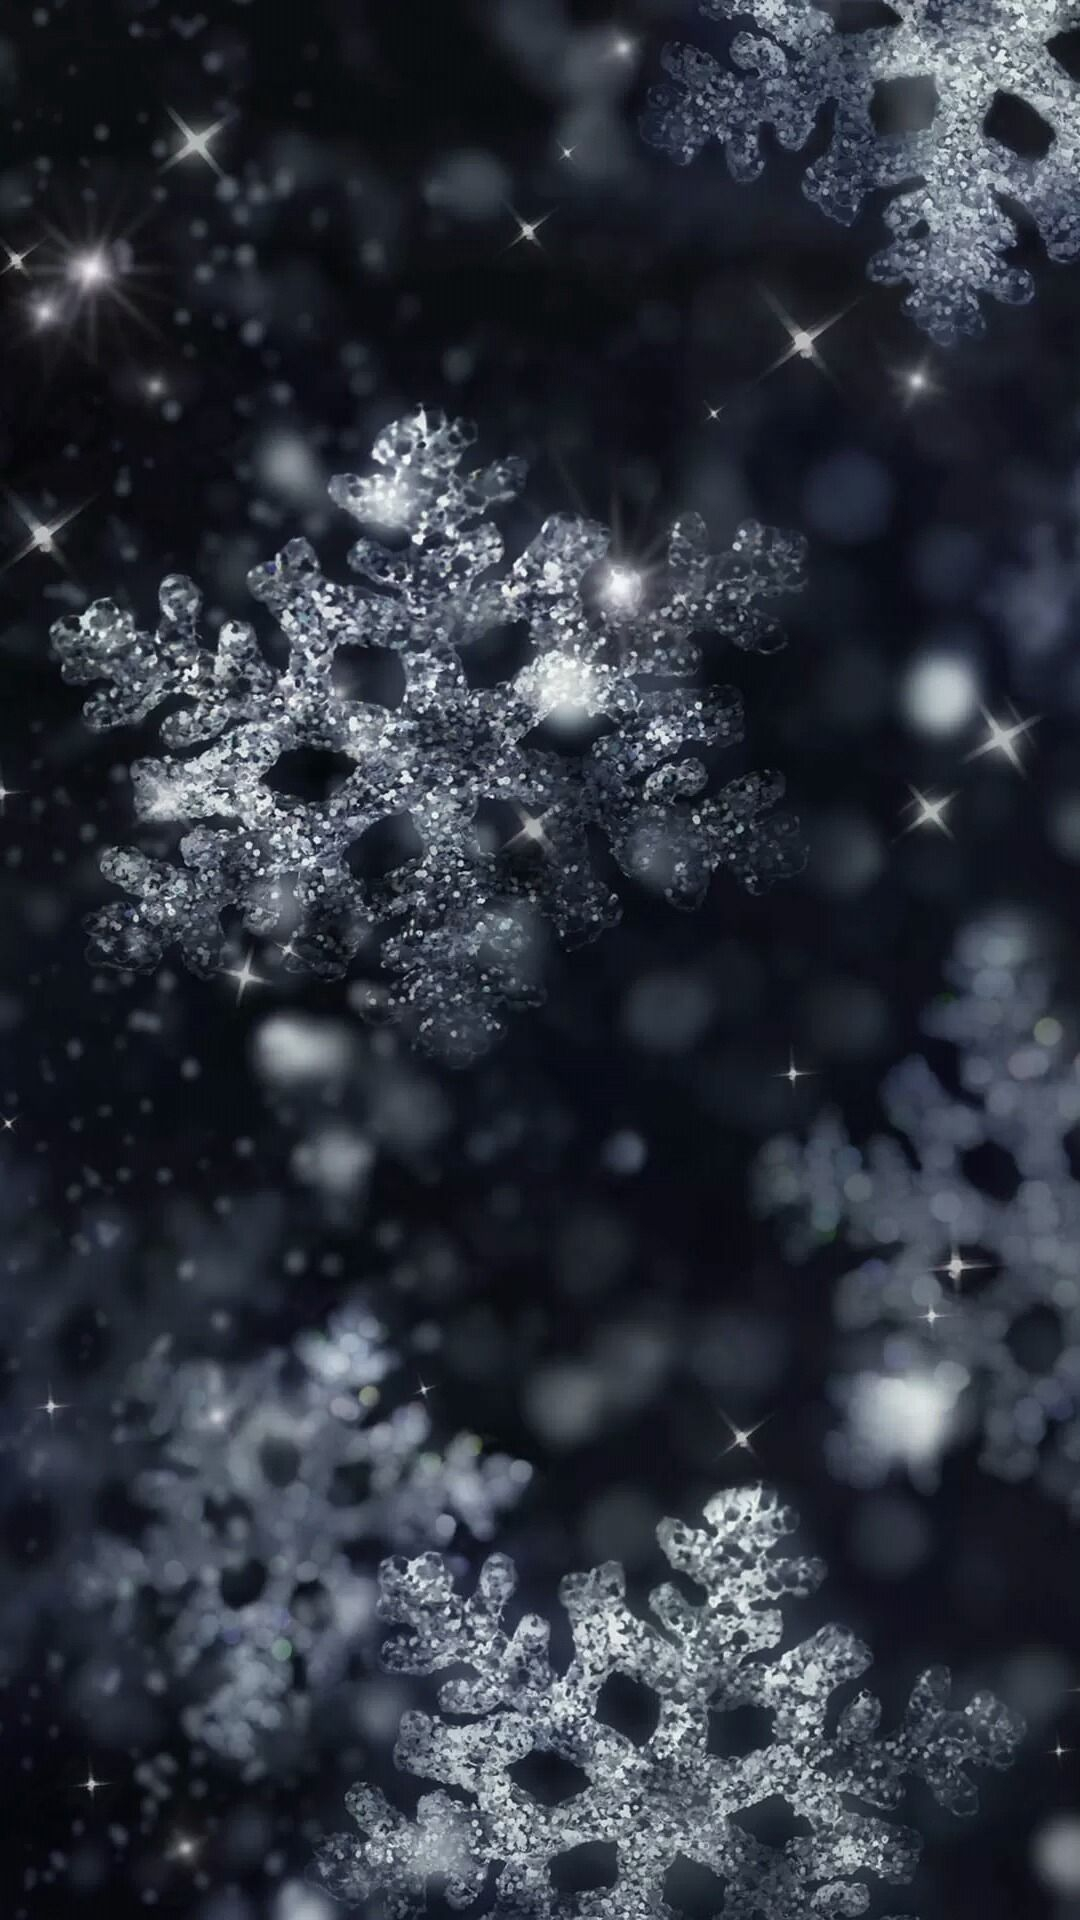 1080x1920 Night glittering snowflakes 1080 x 1920 Wallpapers available for free download. | Christmas wallpapers tumblr, Iphone wallpaper winter, Wallpaper iphone christmas